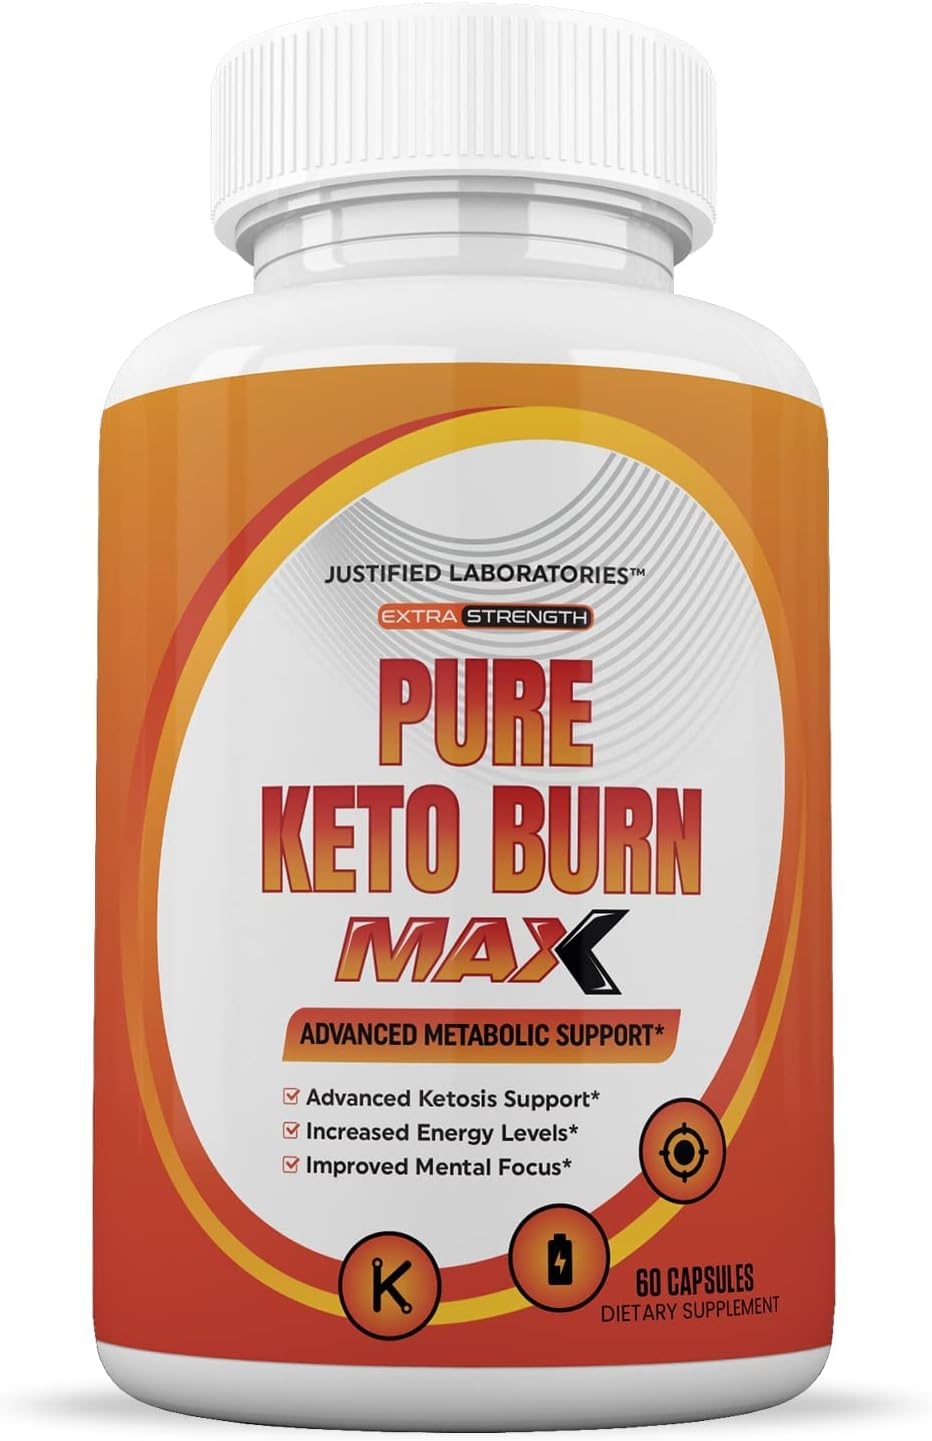 (3 Pack) Pure Keto Burn Max 1200MG Pills Includes Apple Cider Vinegar goBHB Strong Exogenous Ketones Advanced Ketogenic Supplement Ketosis Support for Men Women 180 Capsules